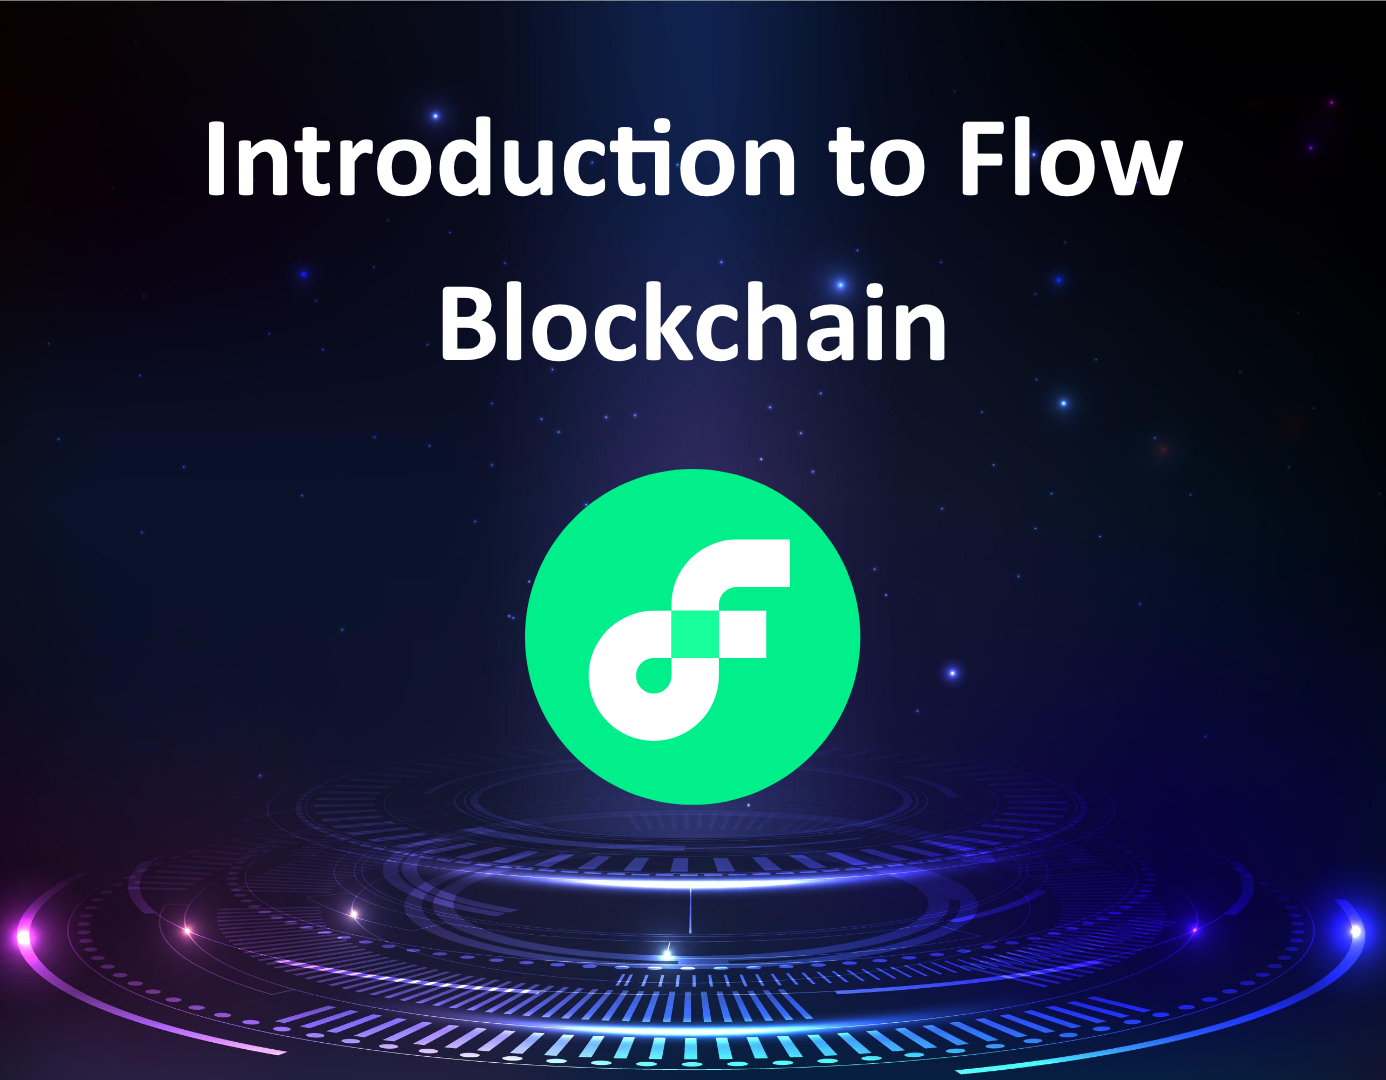 Introduction to Flow Blockchain